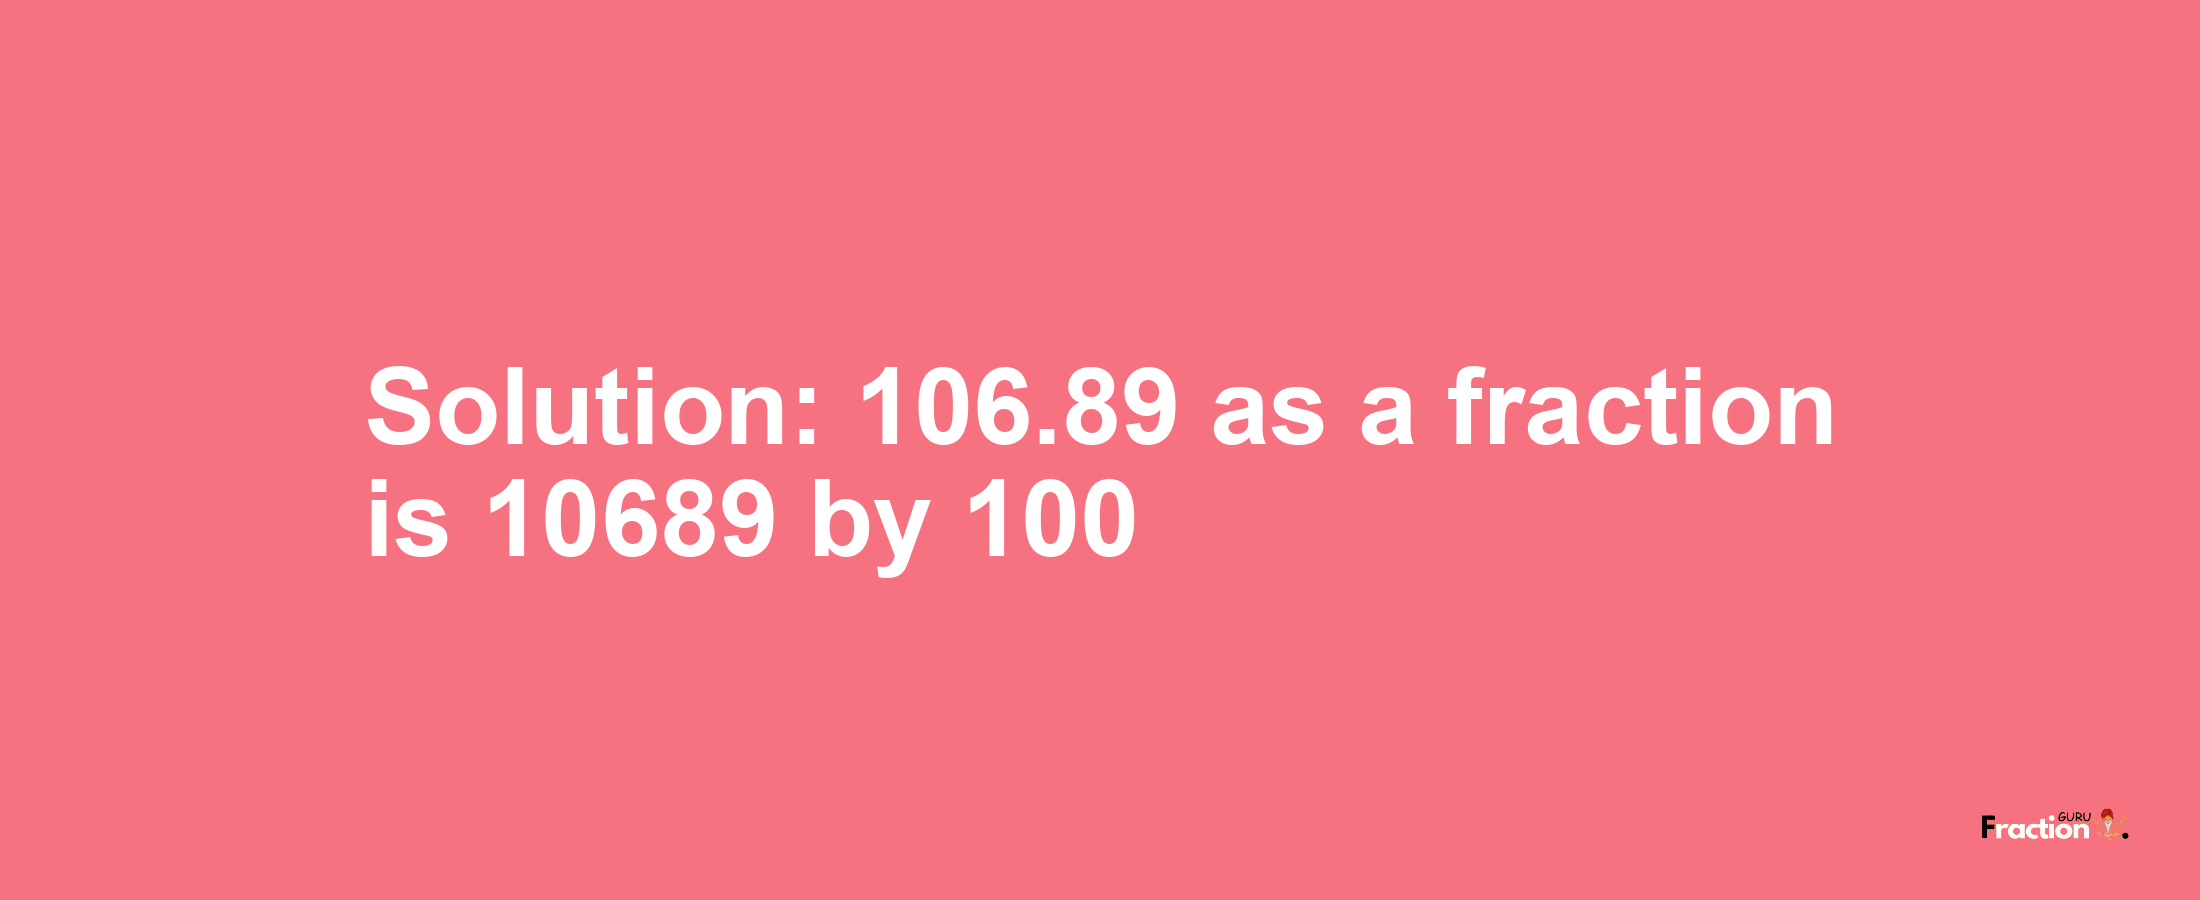 Solution:106.89 as a fraction is 10689/100